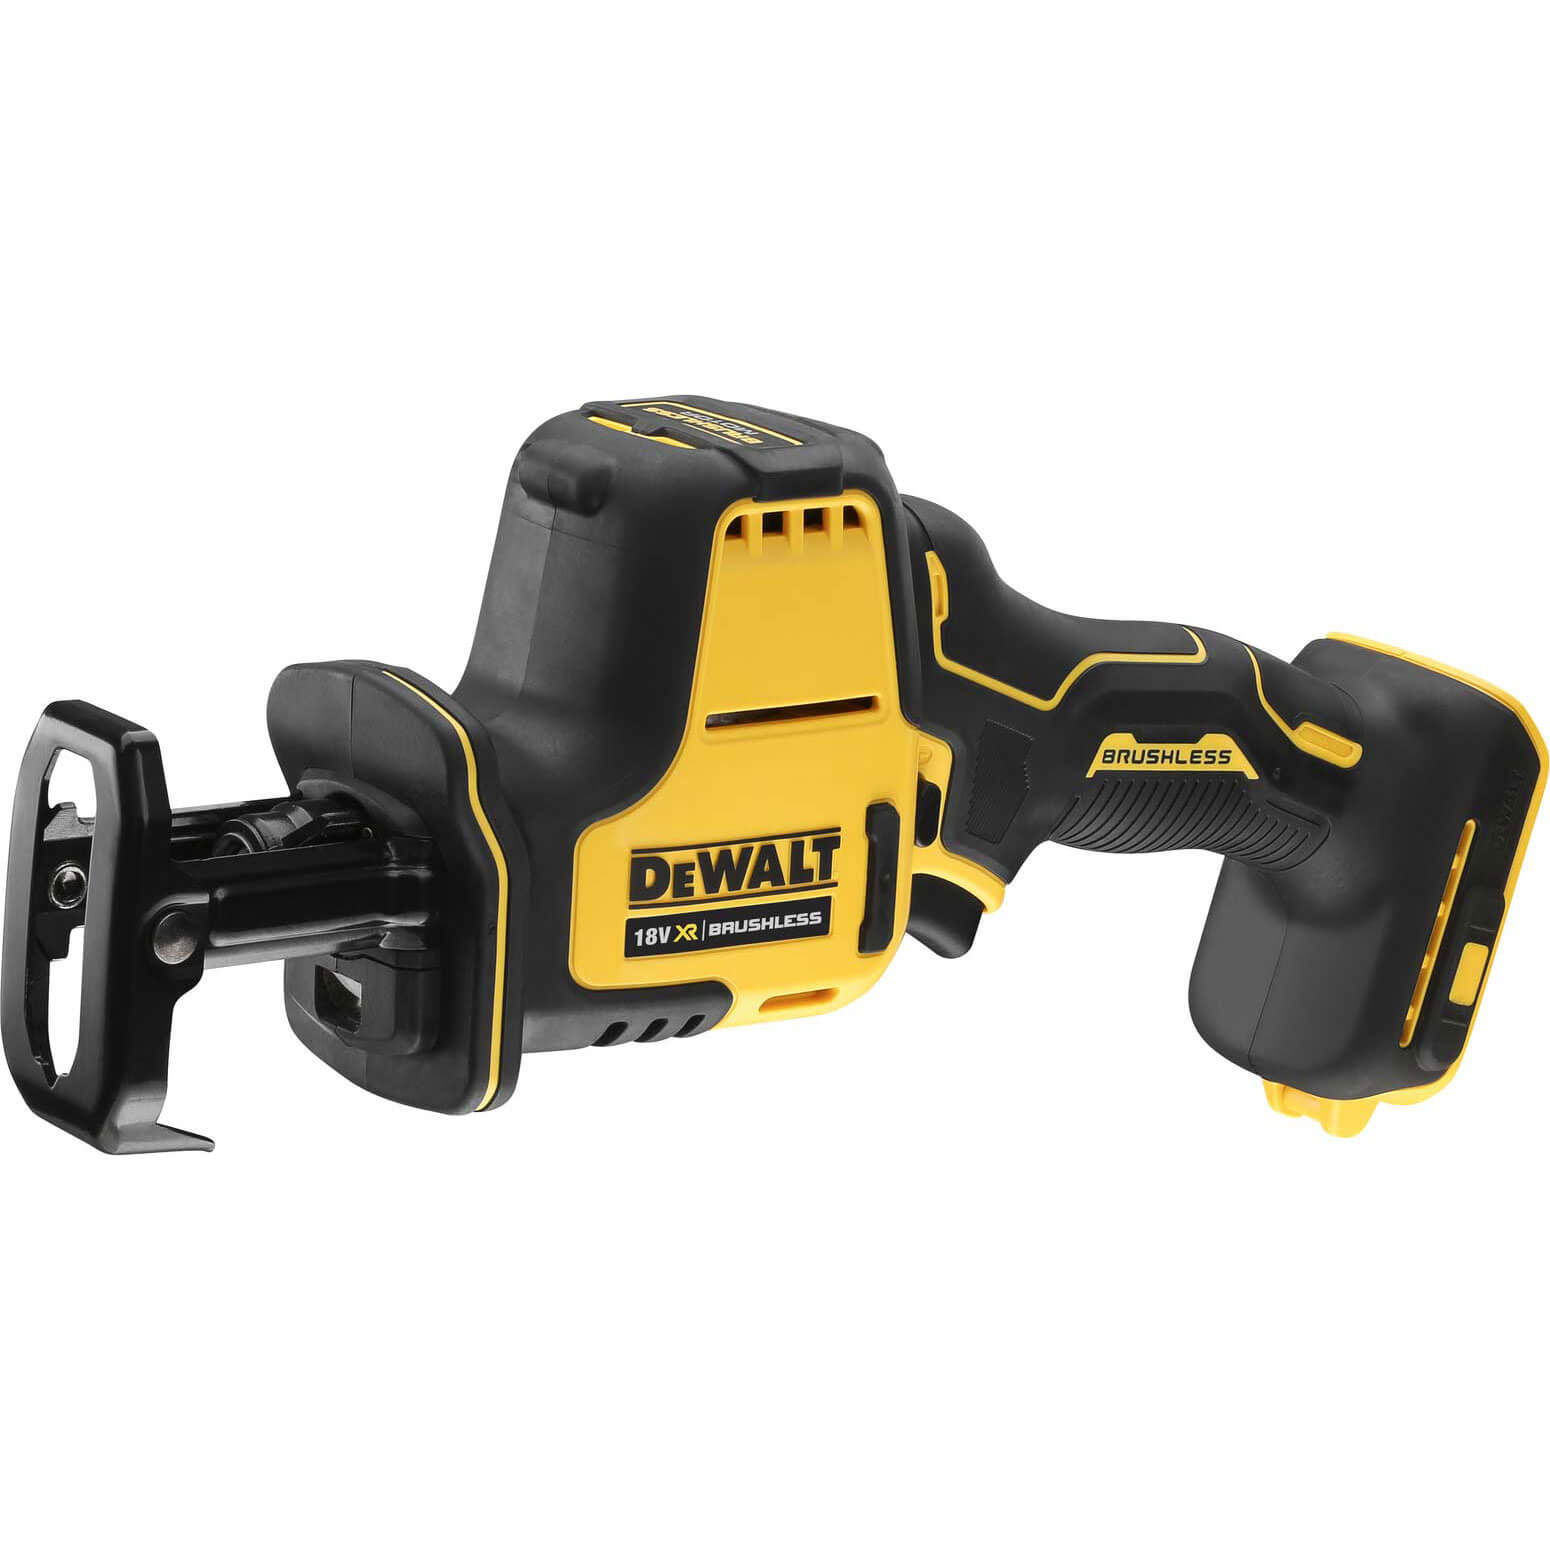 DeWalt DCS369 18v XR Cordless Brushless Compact Reciprocating Saw No Batteries No Charger No Case